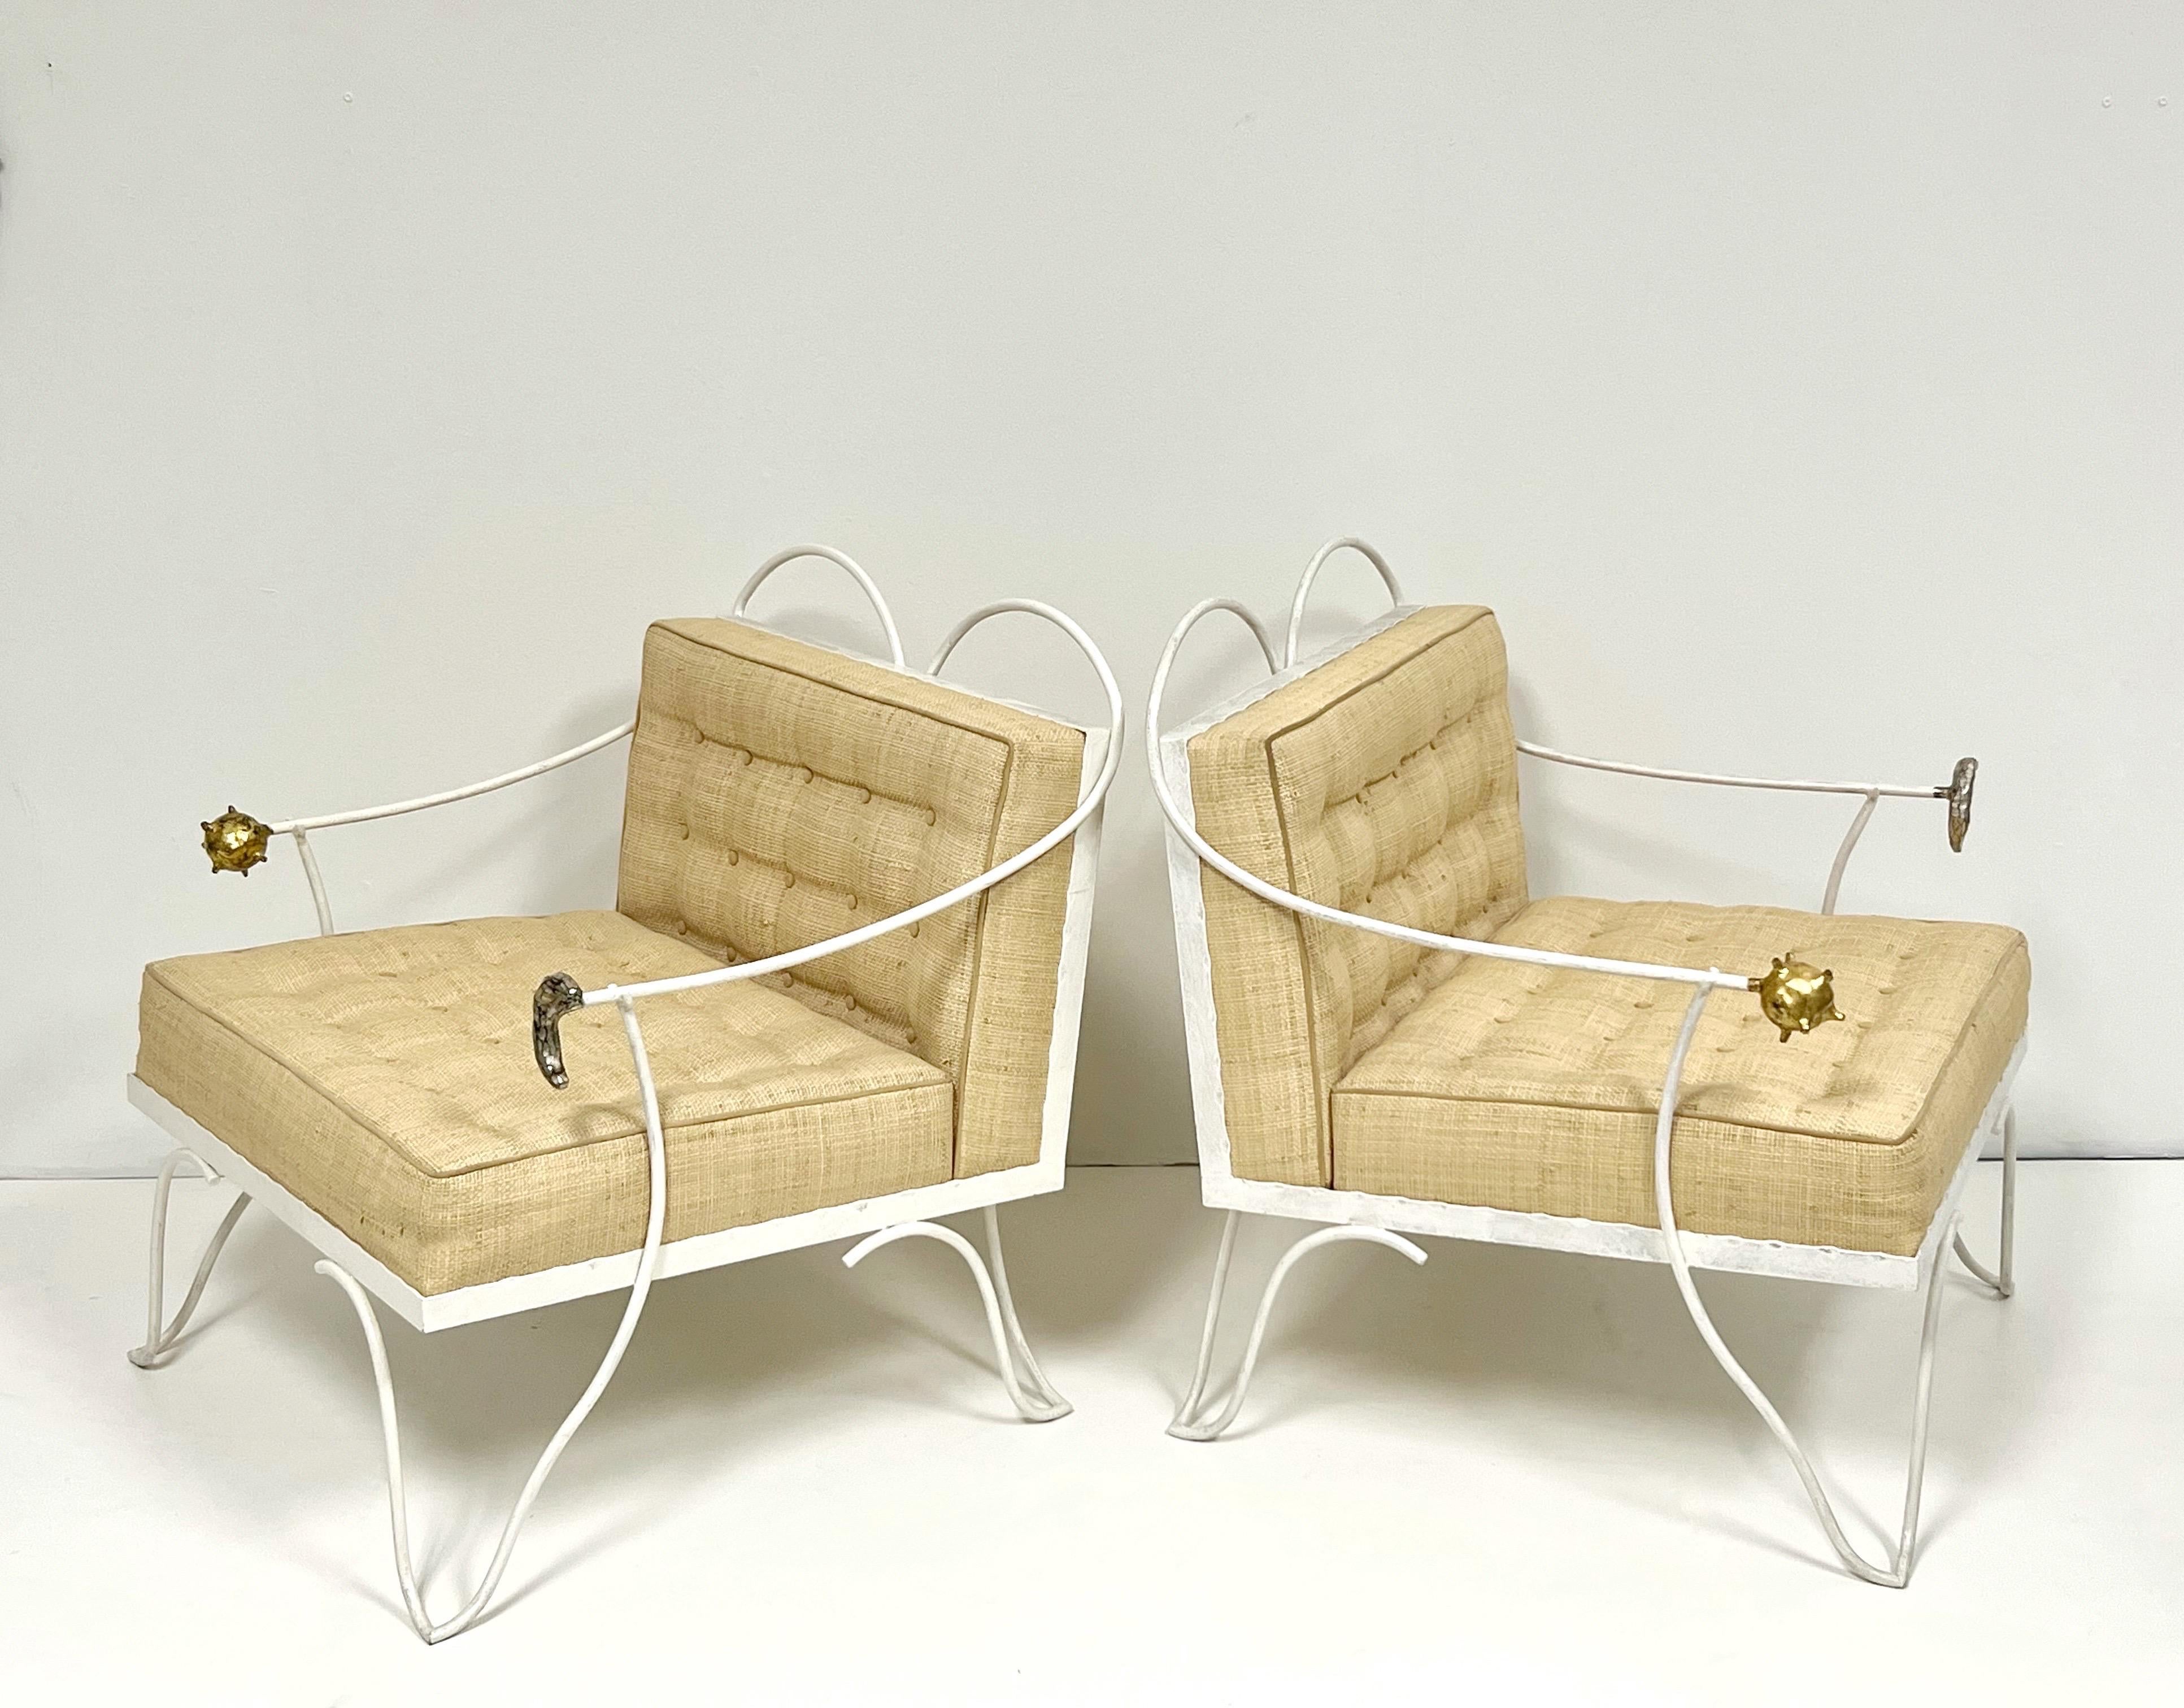 A pair of Garouste and Bonetti chairs and ottoman. Steel frames with hand applied enamel finish. A stylized representation of the sun and the moon at the end of the arms done in gold and silver leaf respectively. Retain the original hand woven